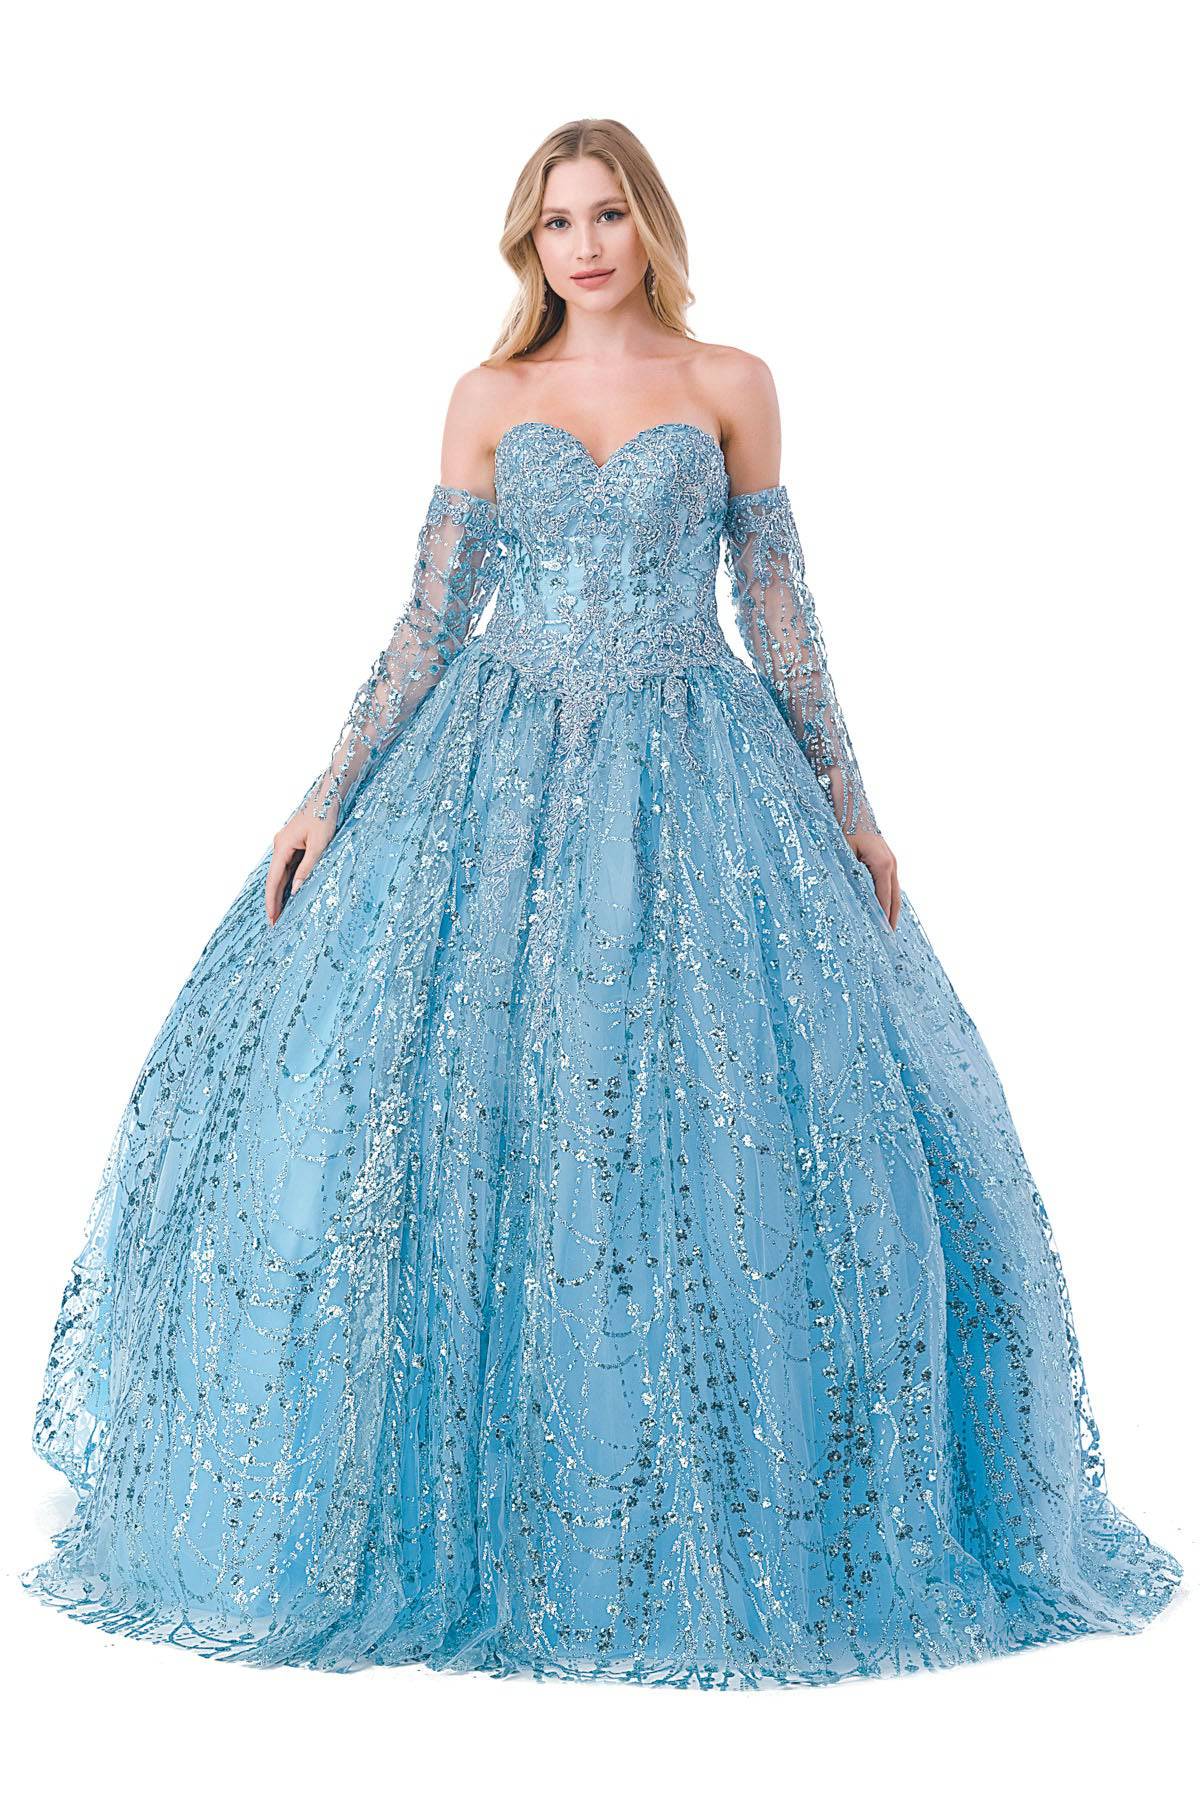 Aspeed L2460 Off Shoulder Sleeved Sequin Quinceanera Dress - NORMA REED